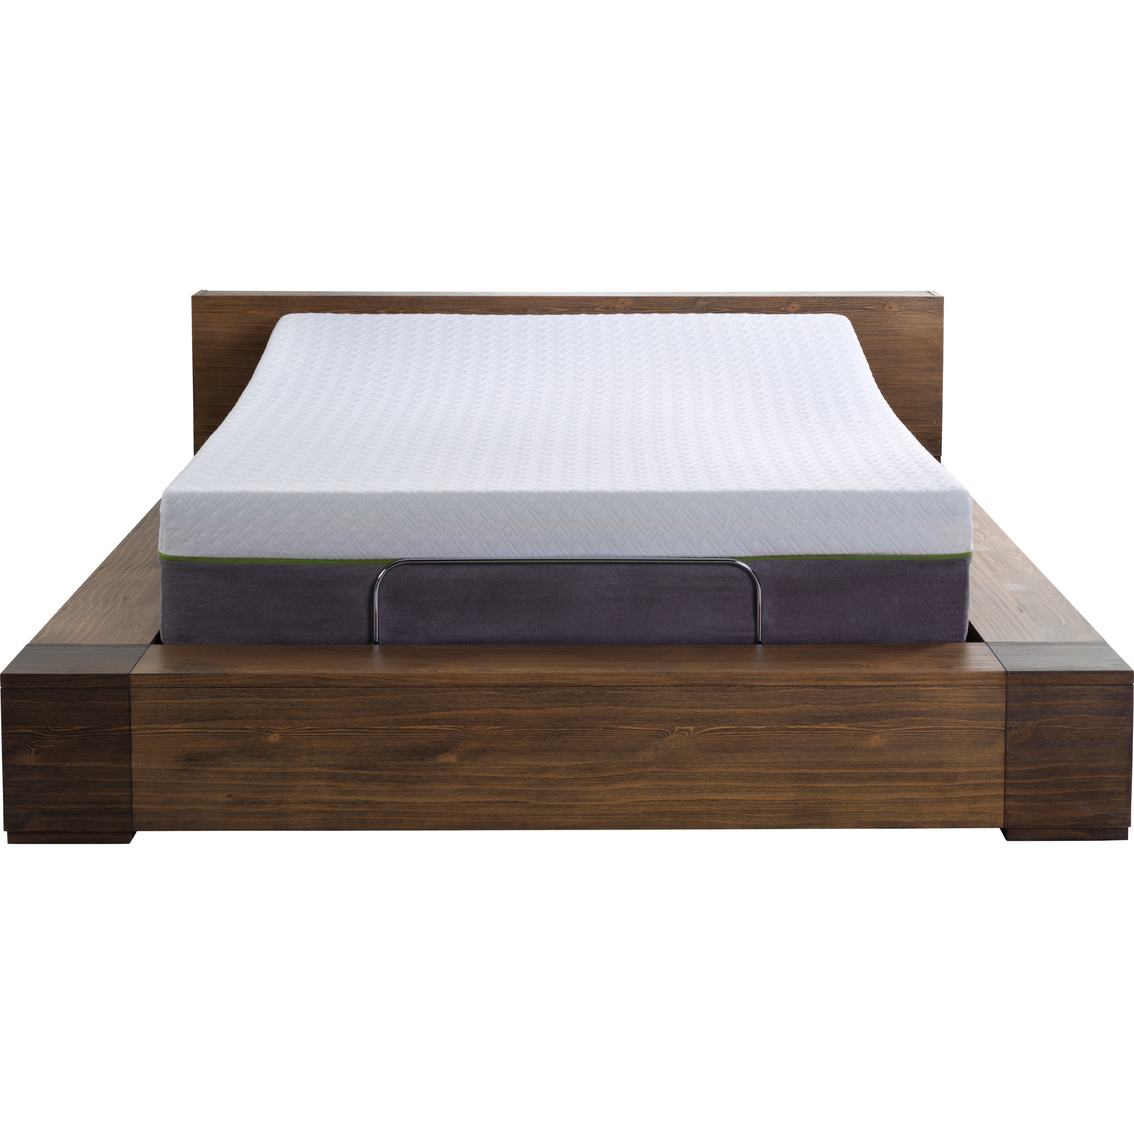 Motion Trend 12 in. Copper Infused Memory Foam Mattress with M4000 Adjustable Base - Image 2 of 6